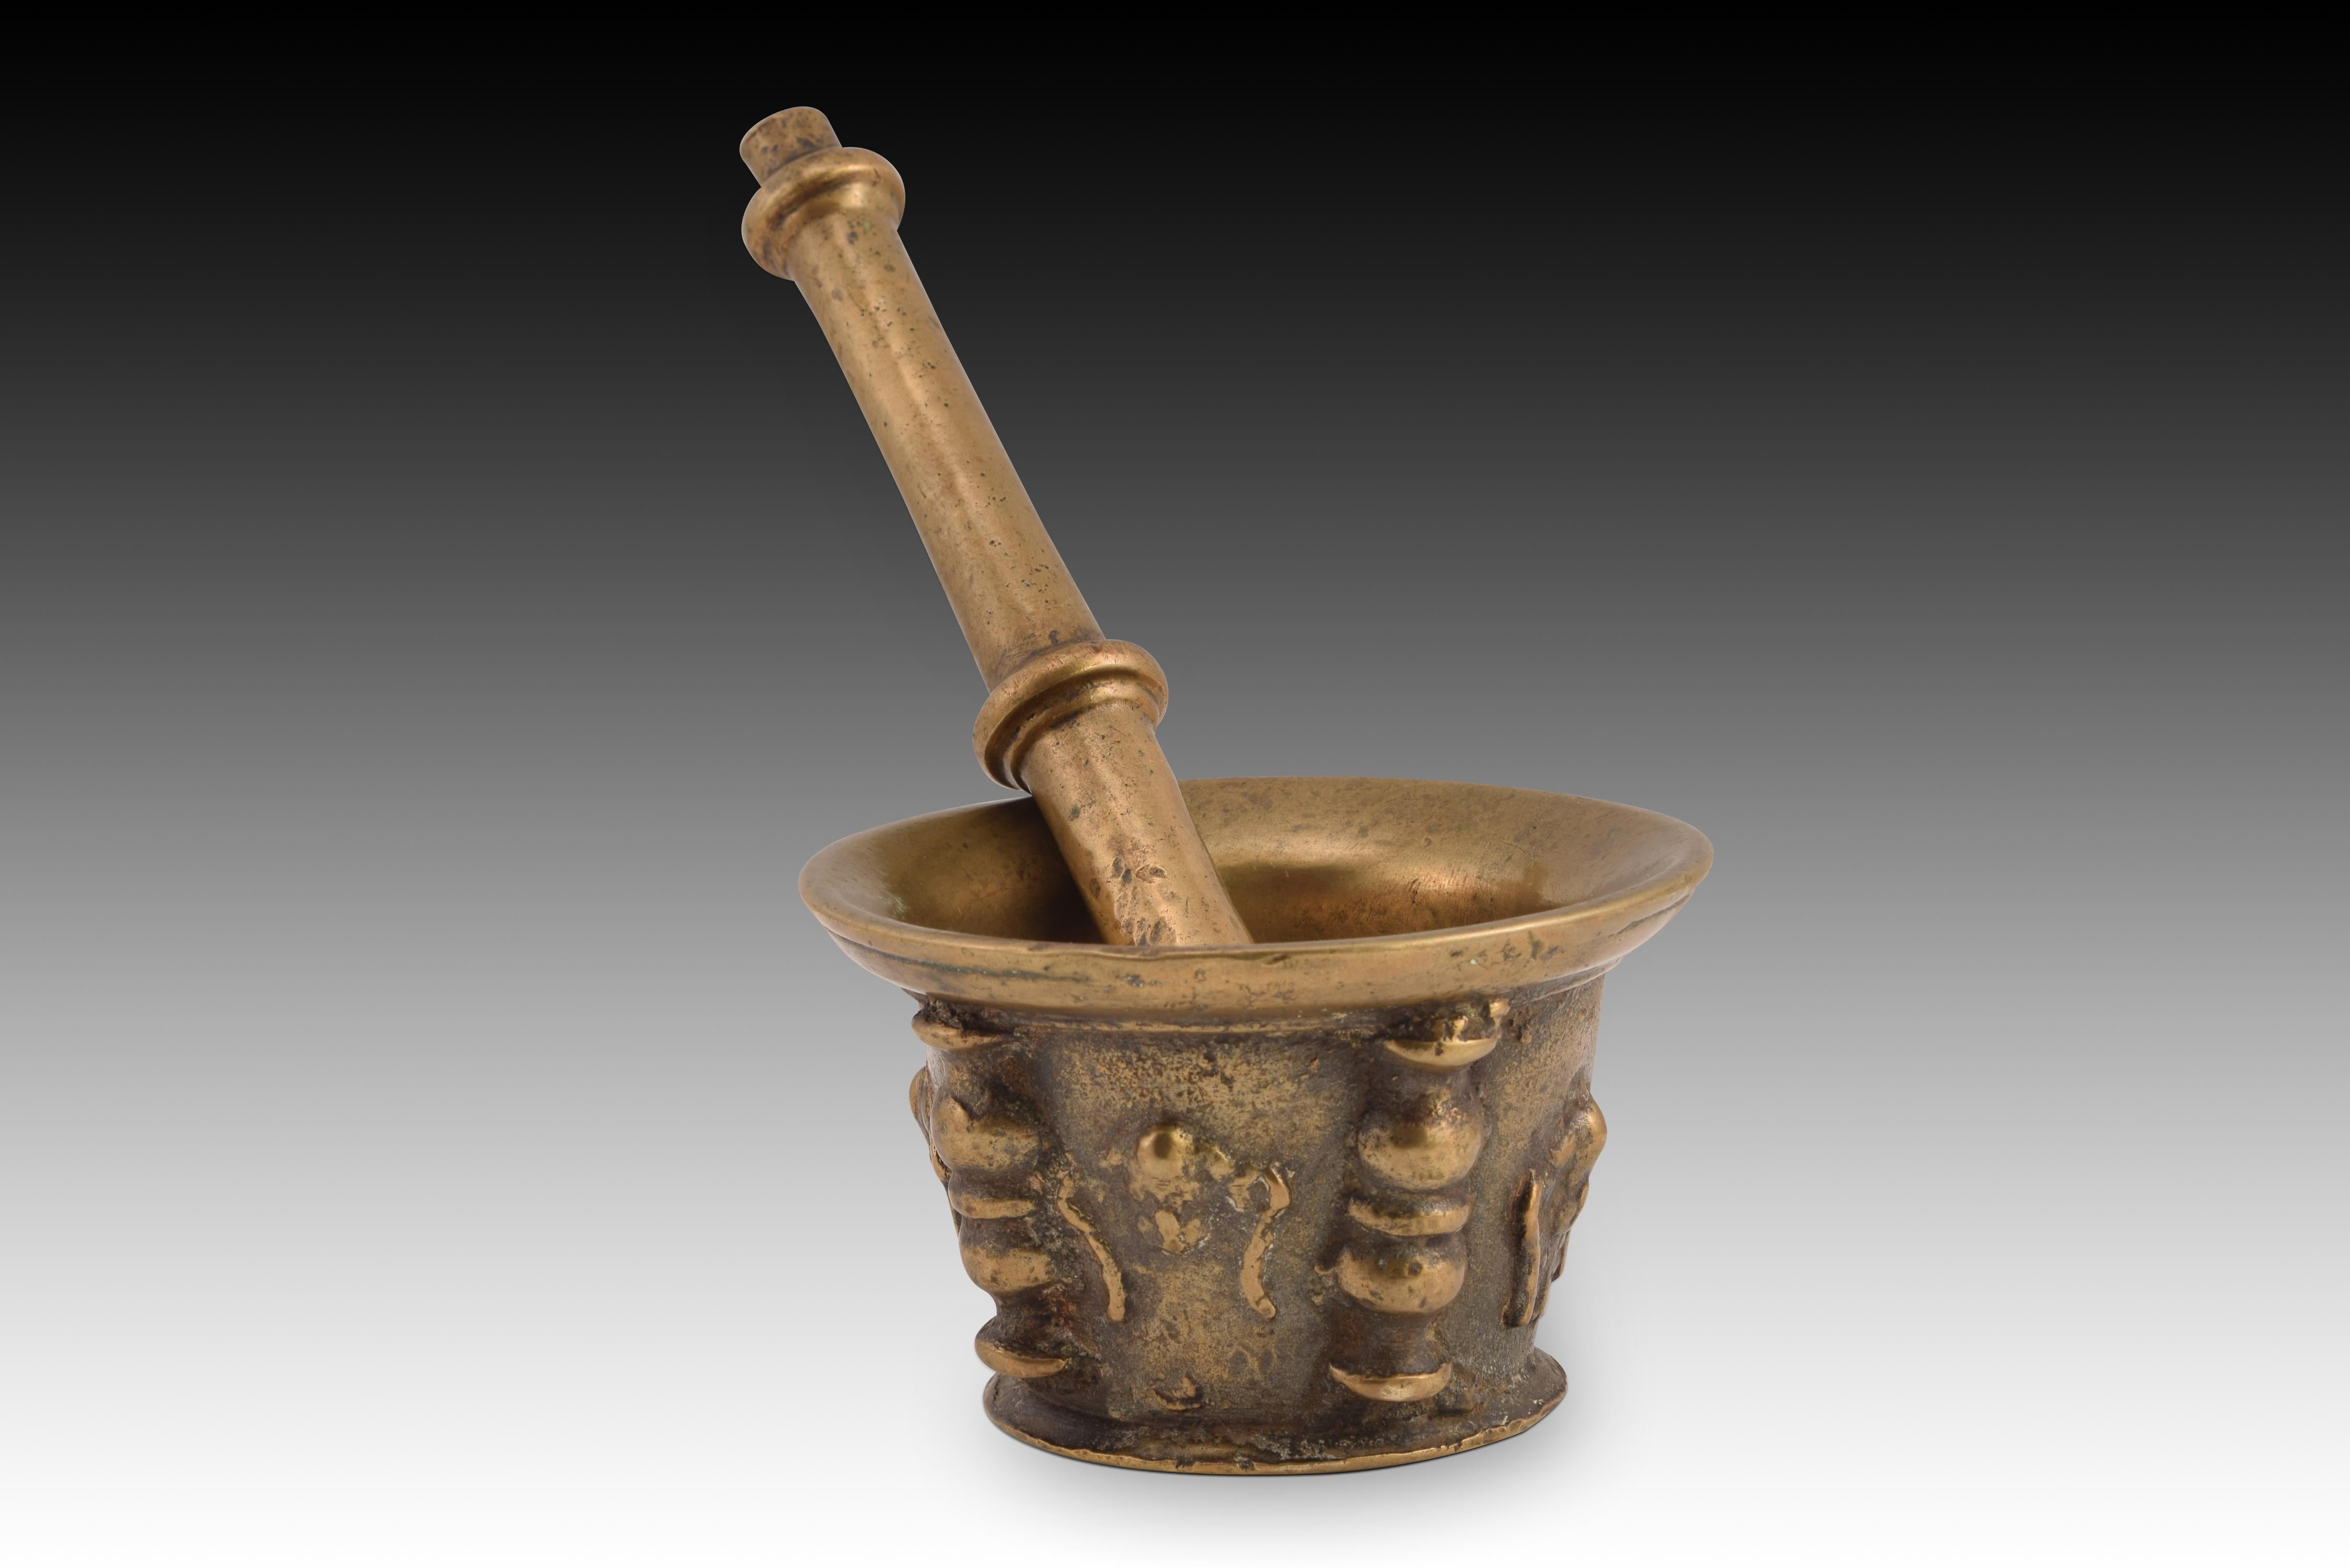 Mortar with pestle. Bronze. Spanish school, 17th century. 
Bronze mortar with a convex mouth, a raised base facing outwards and a cylindrical body decorated on the outside with reliefs alternating shapes (probably figurative in origin, perhaps angel